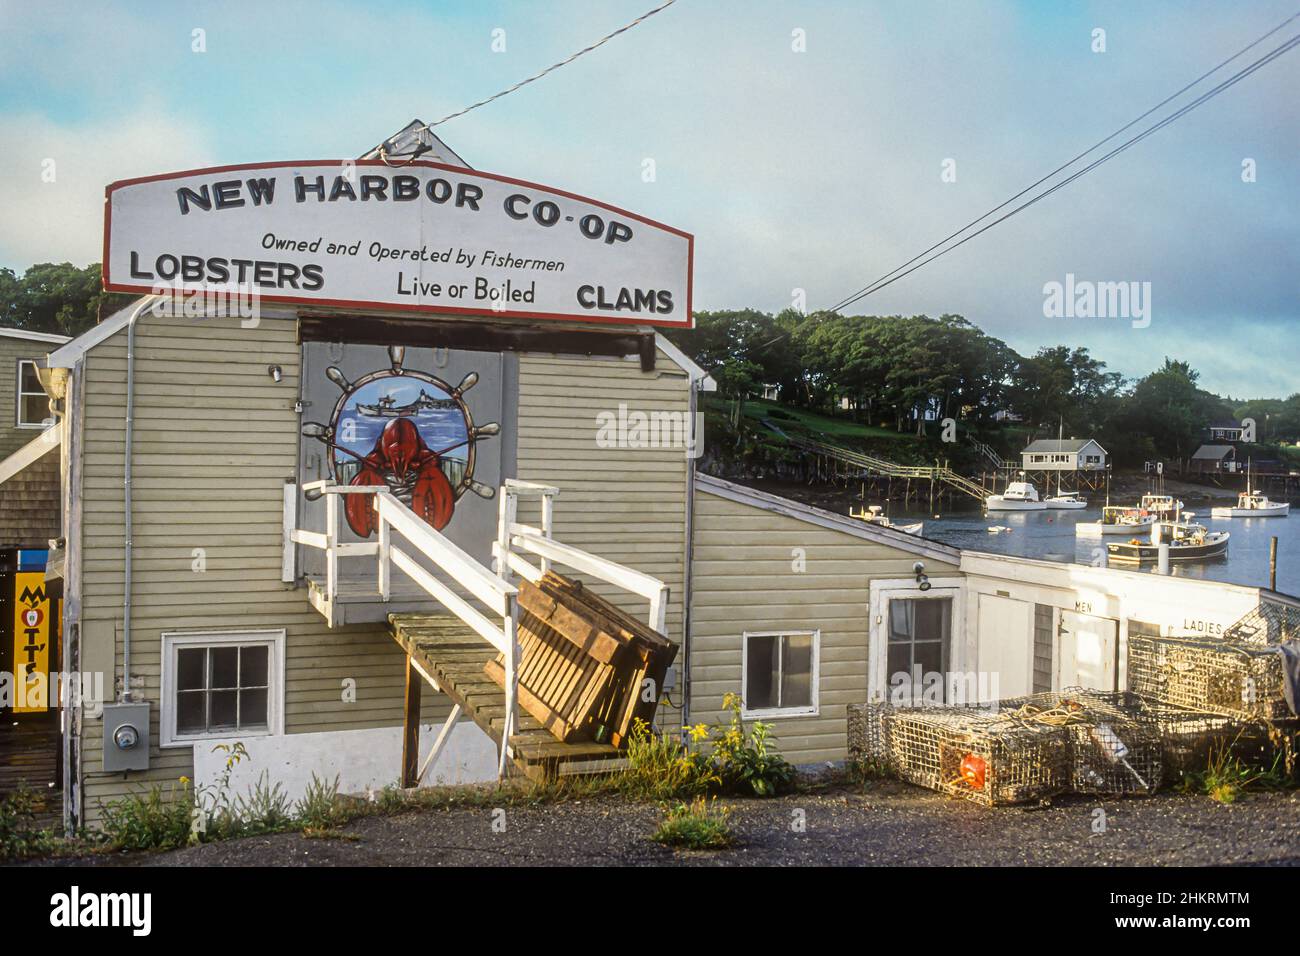 The New Harbour Co-op a New Harbor, Maine Foto Stock